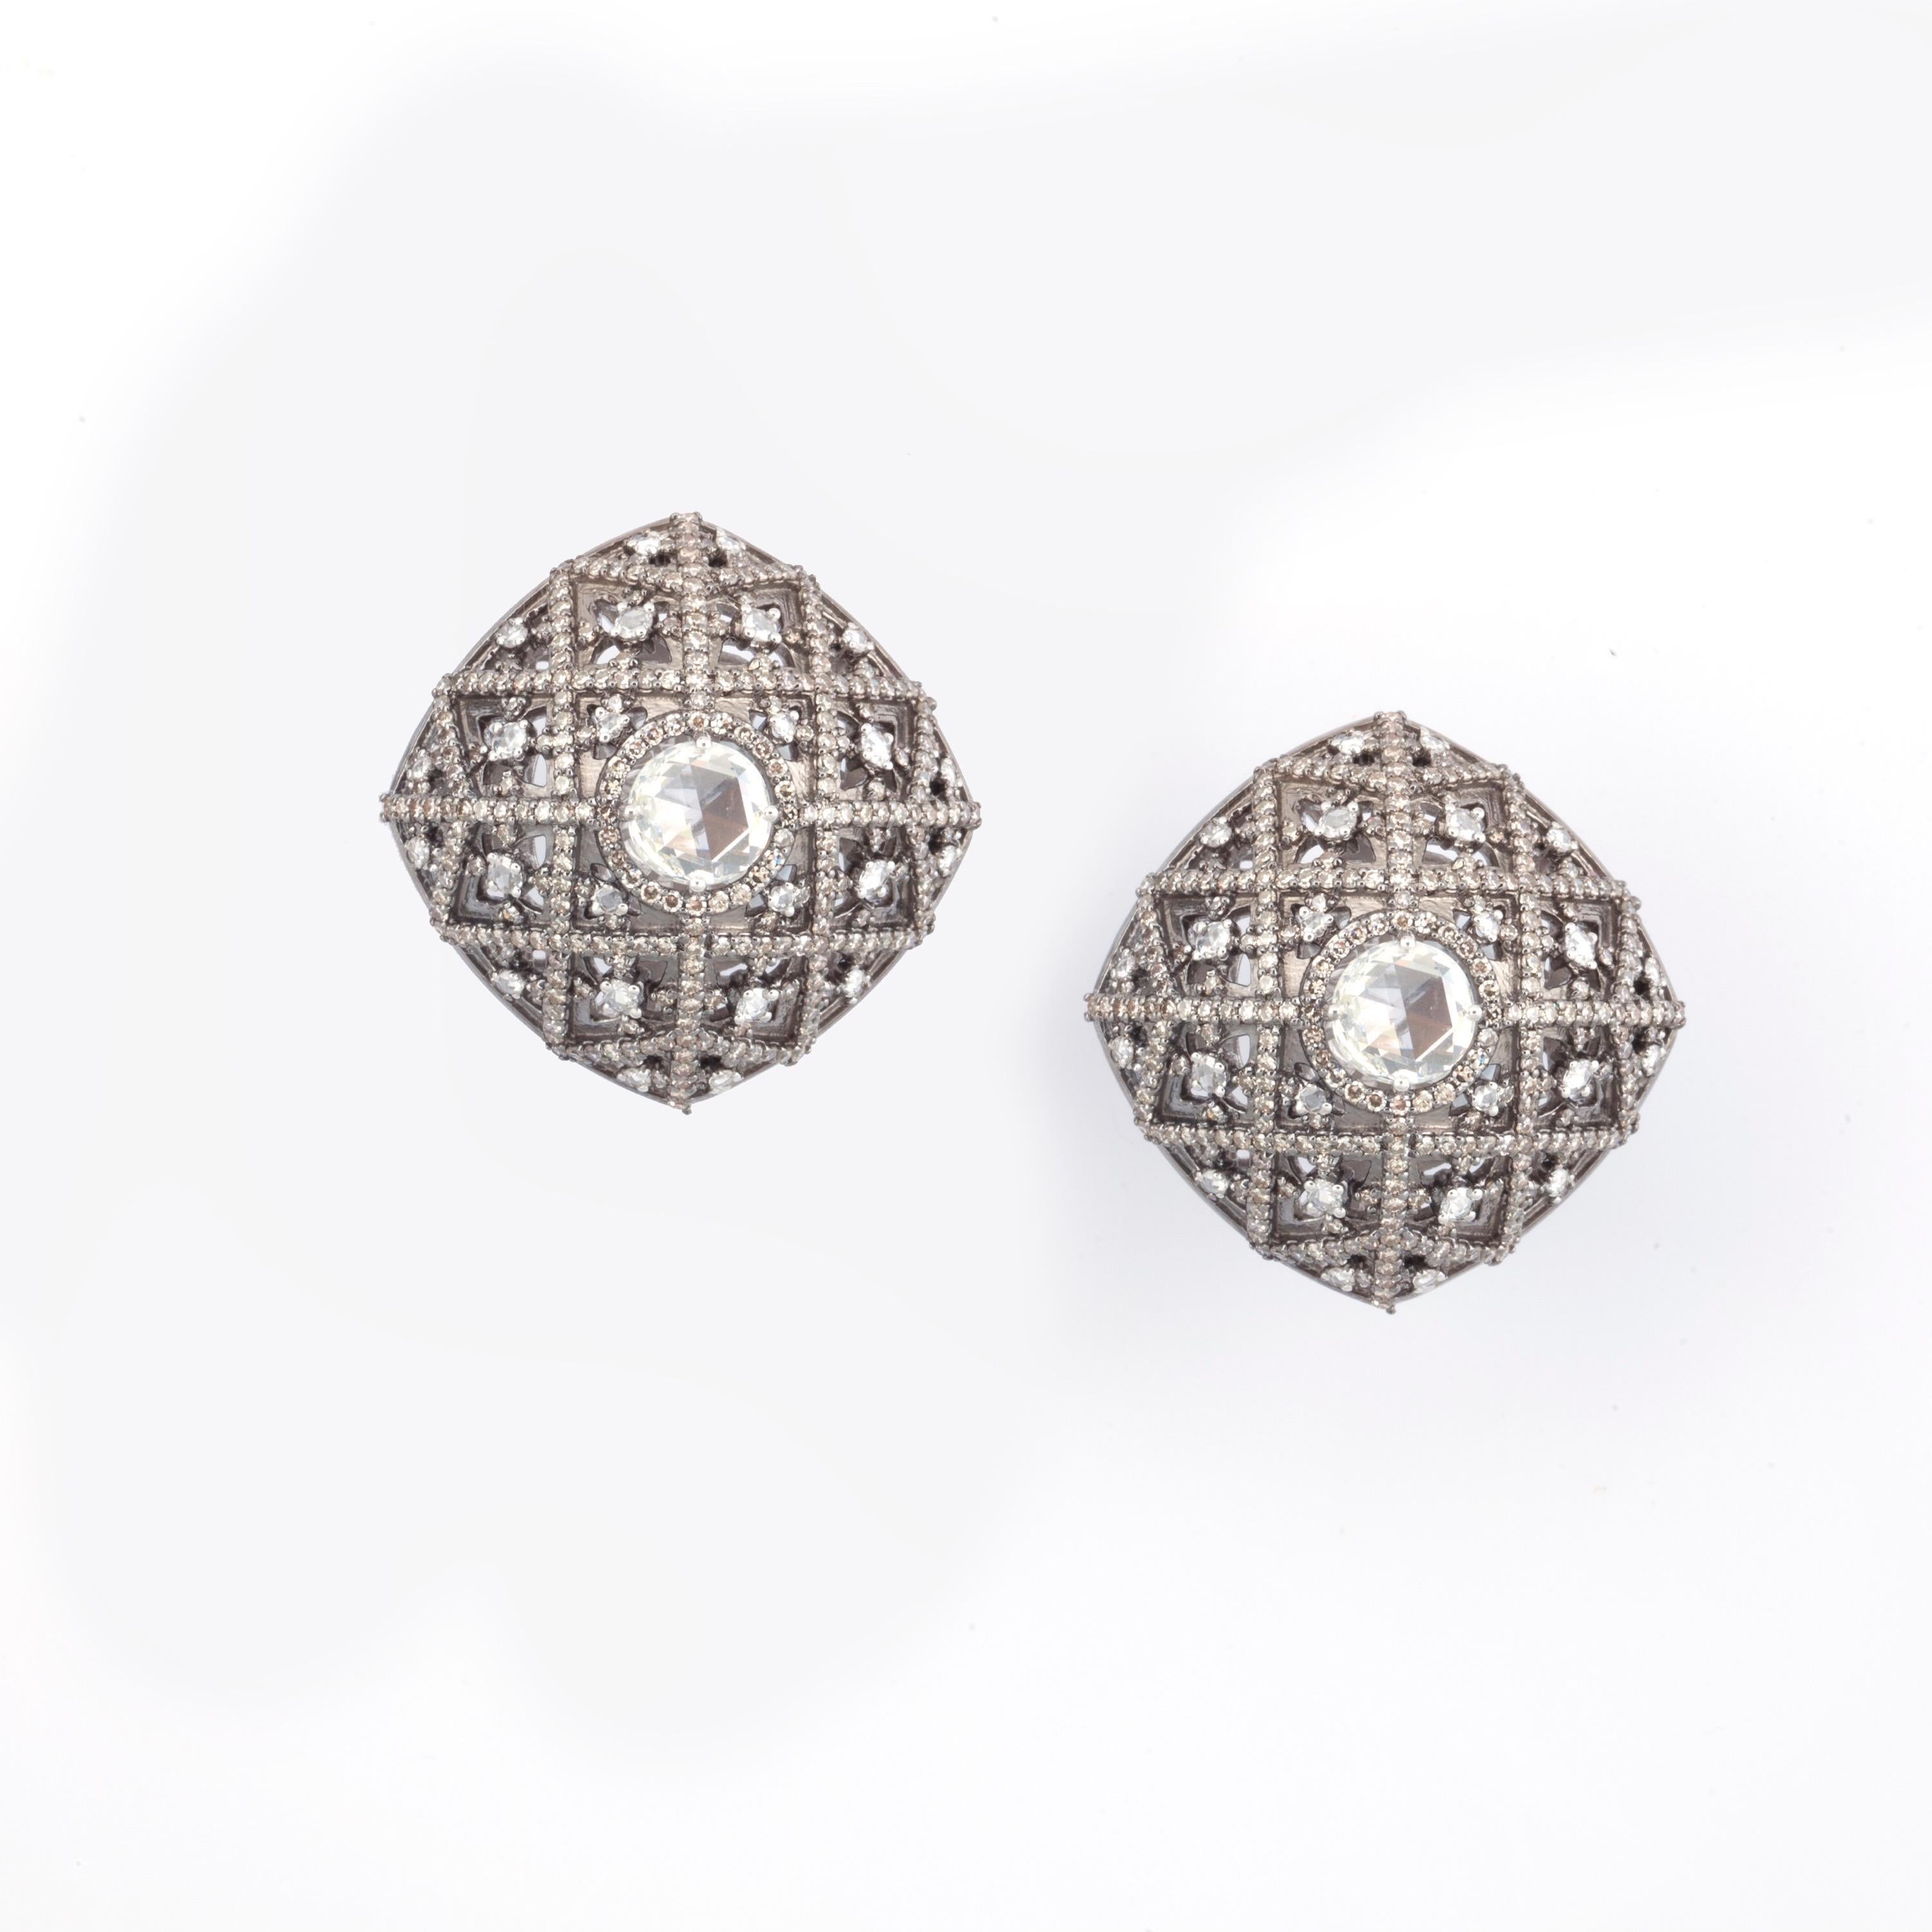 The Saint Andre’s Cathedral, Bordeaux (France) is the backdrop for this Gothic rose cut earrings in antique finish in 18K white gold. A different perspective to tell the story. 

Material: 18k gold 
Rose cut white diamonds: 48 pieces, 0.65 carats